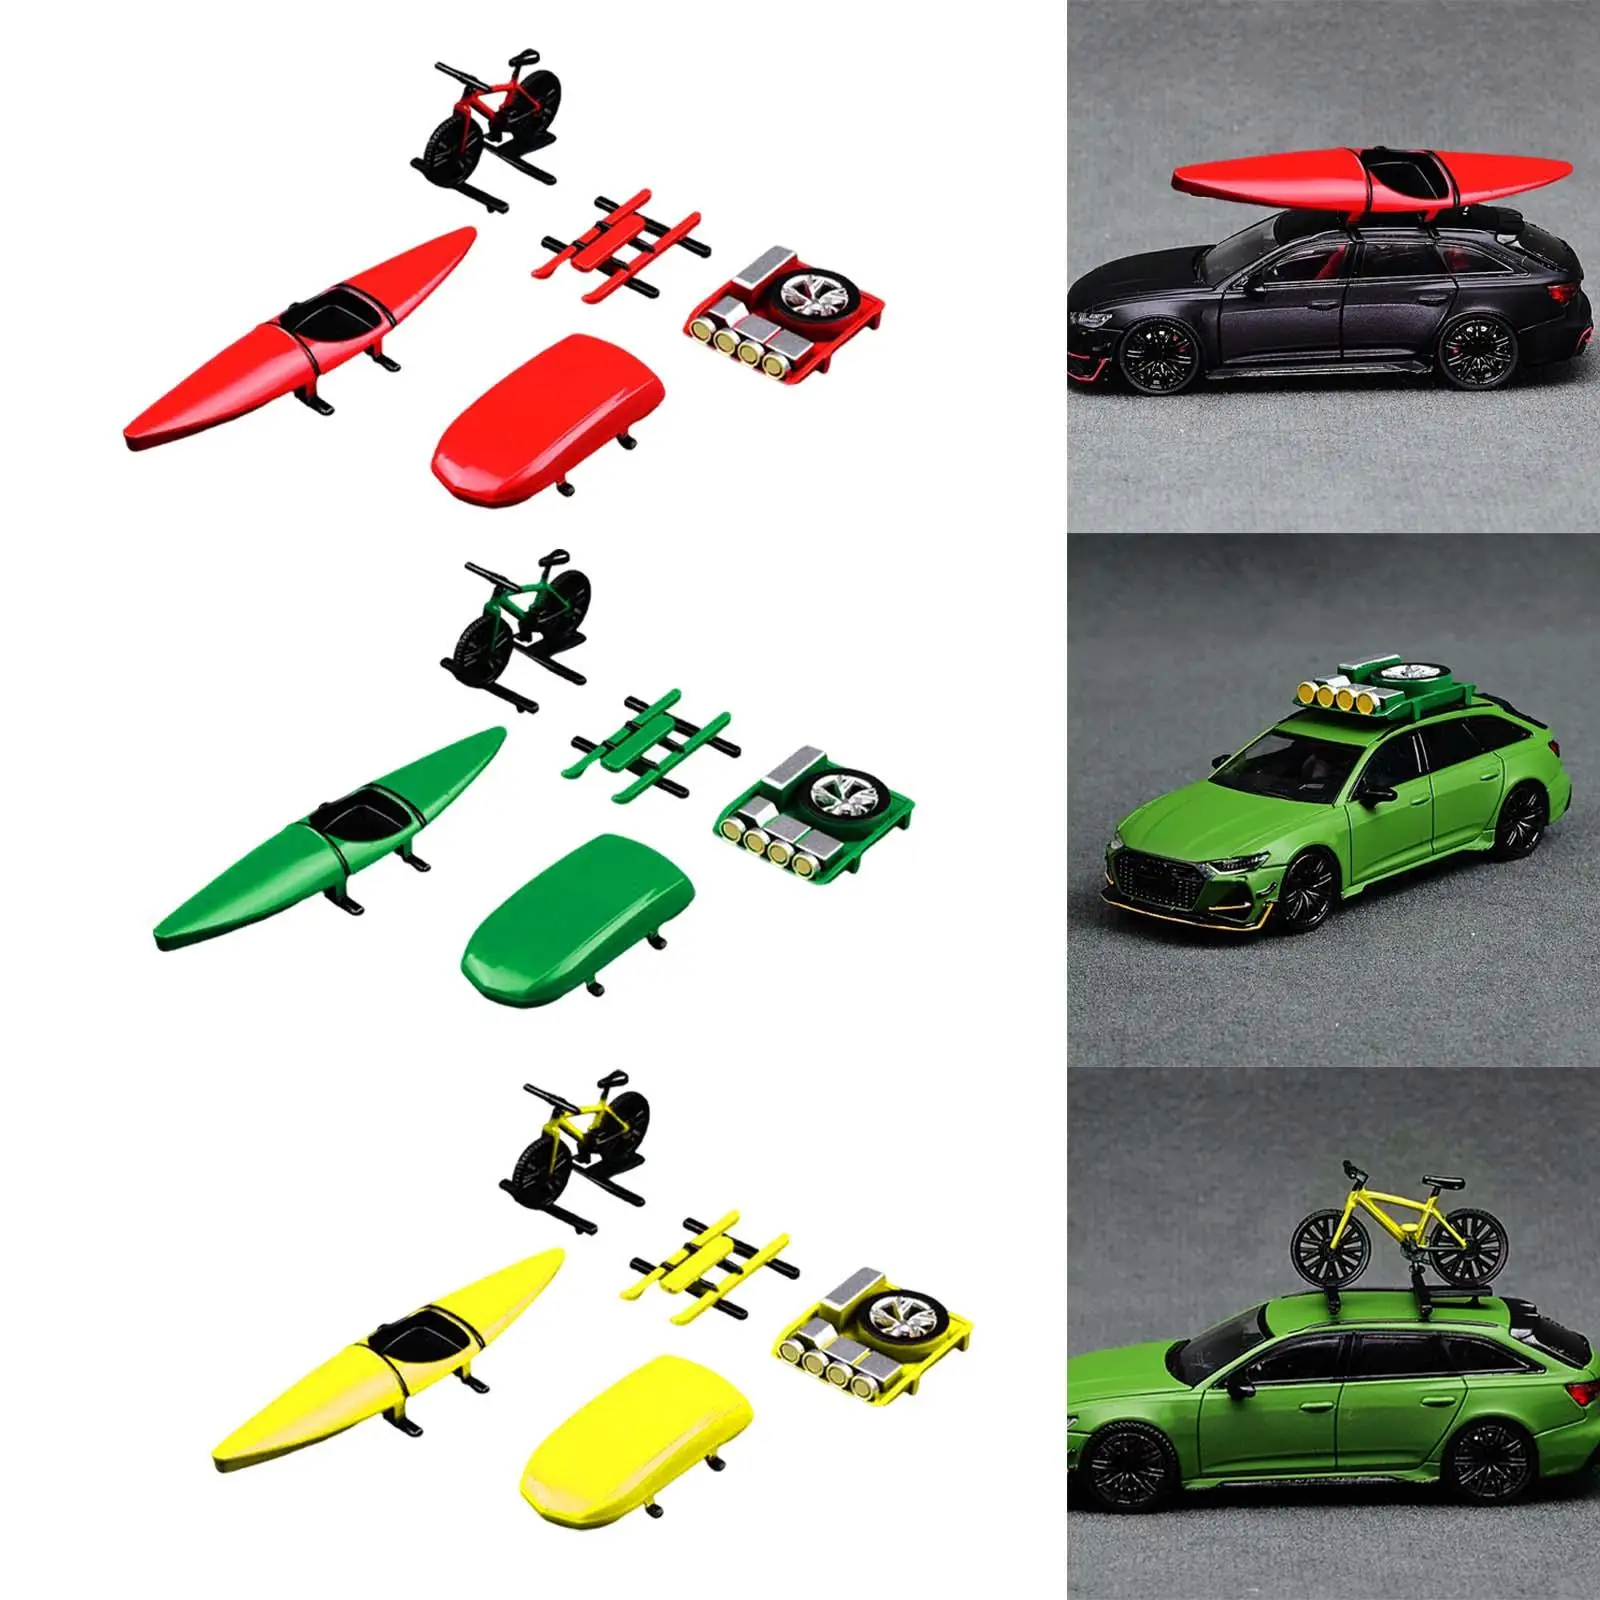 5Pcs Replace Parts Model Car Parts Kit Luggage Rack roof Box Tire Kayak for 1/64 RC Car DIY Modified Vehicle Accessory Part